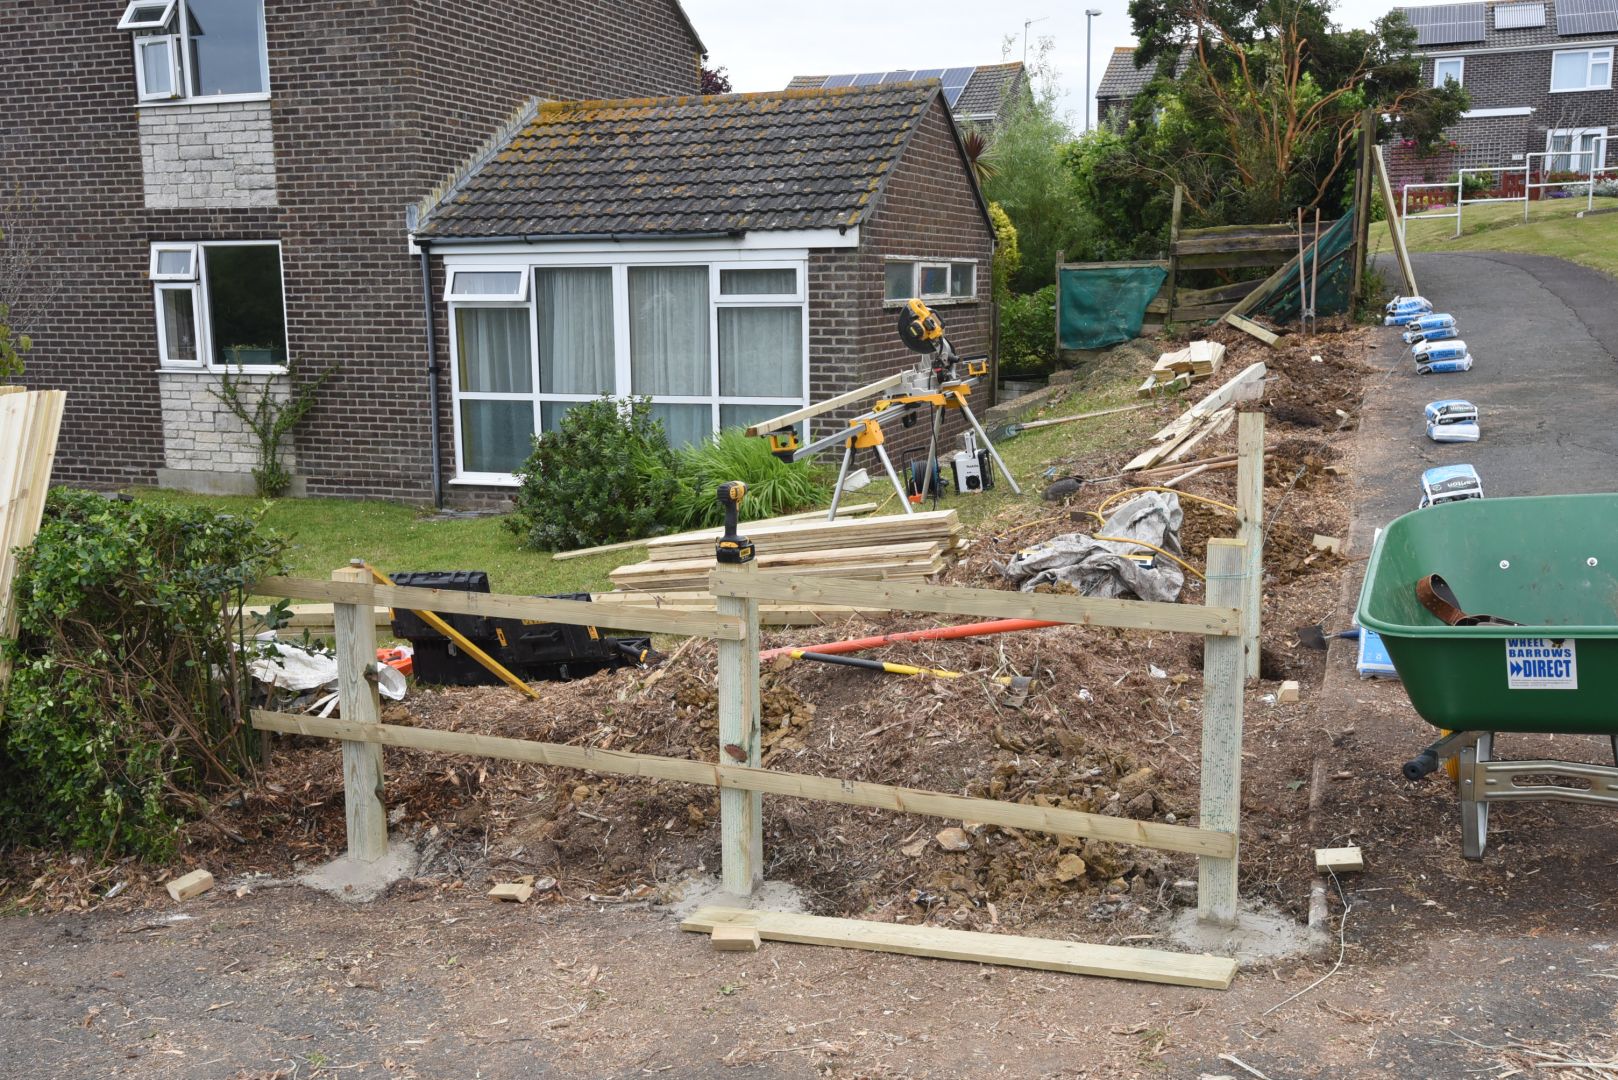 fencing, featherboard, Weymouth, Weymouth fencing, fencing specialists, Weymouth fencing specialists